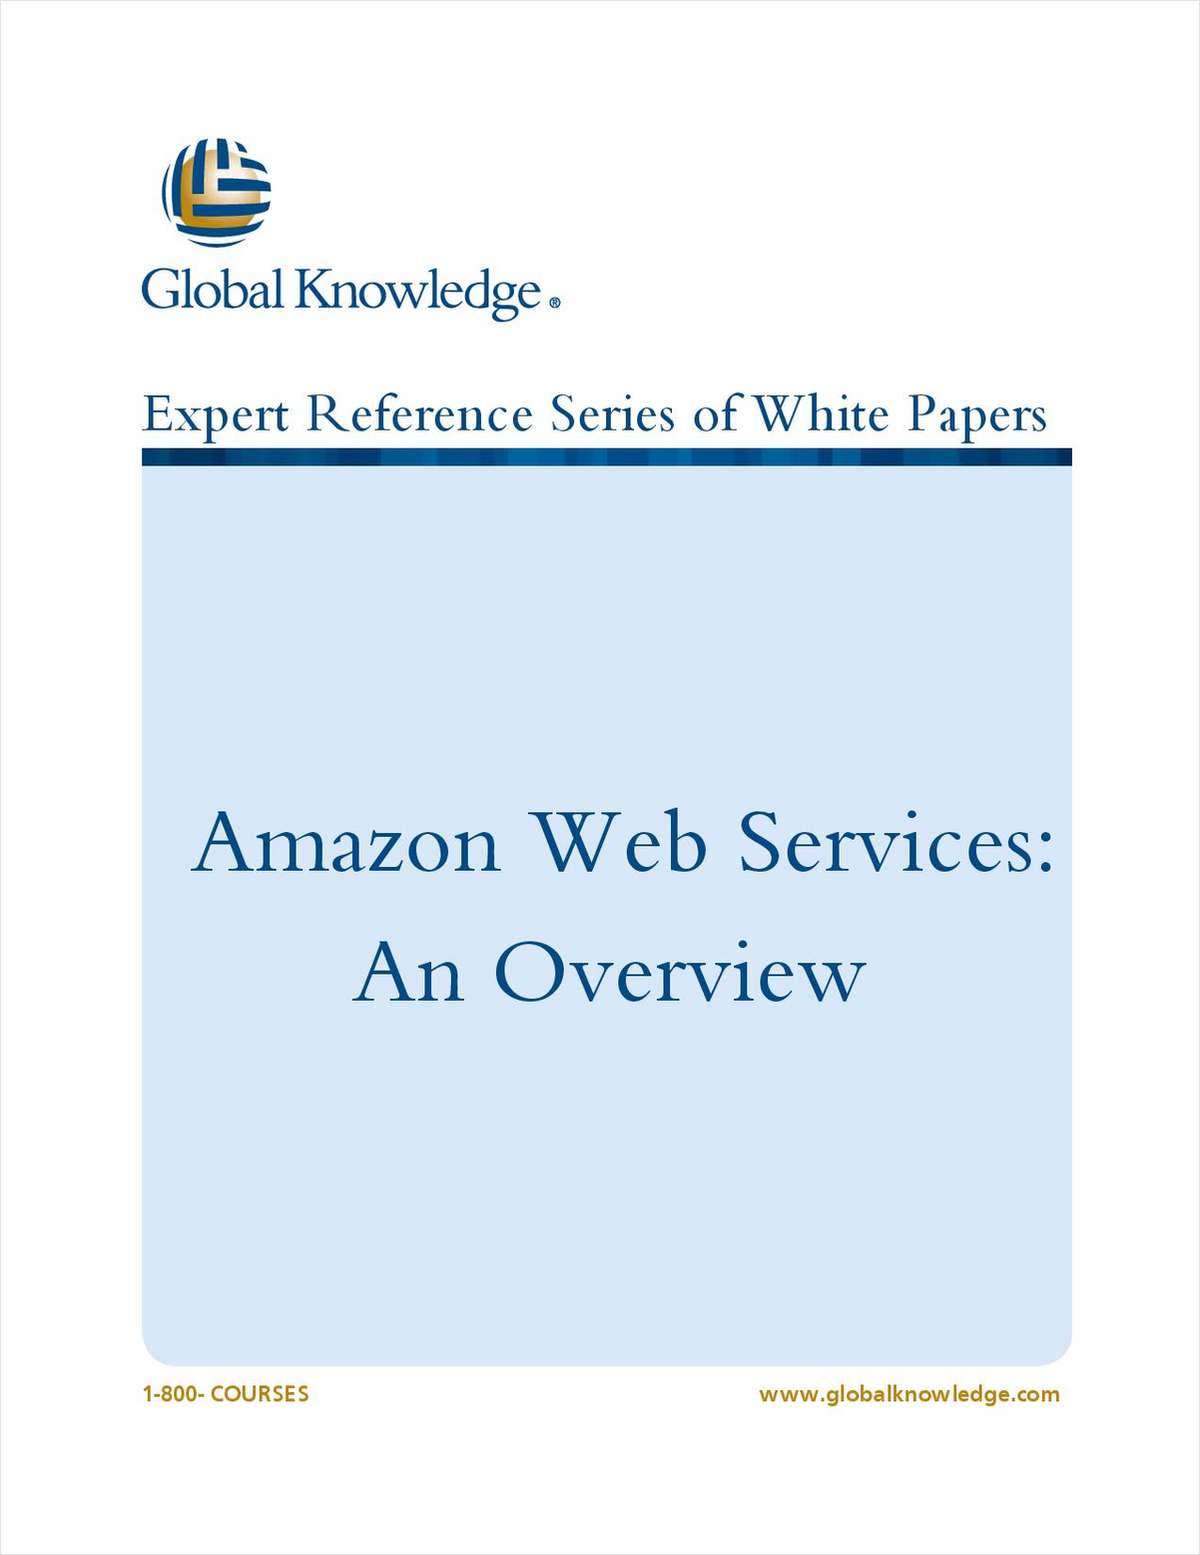 Amazon Web Services: An Overview